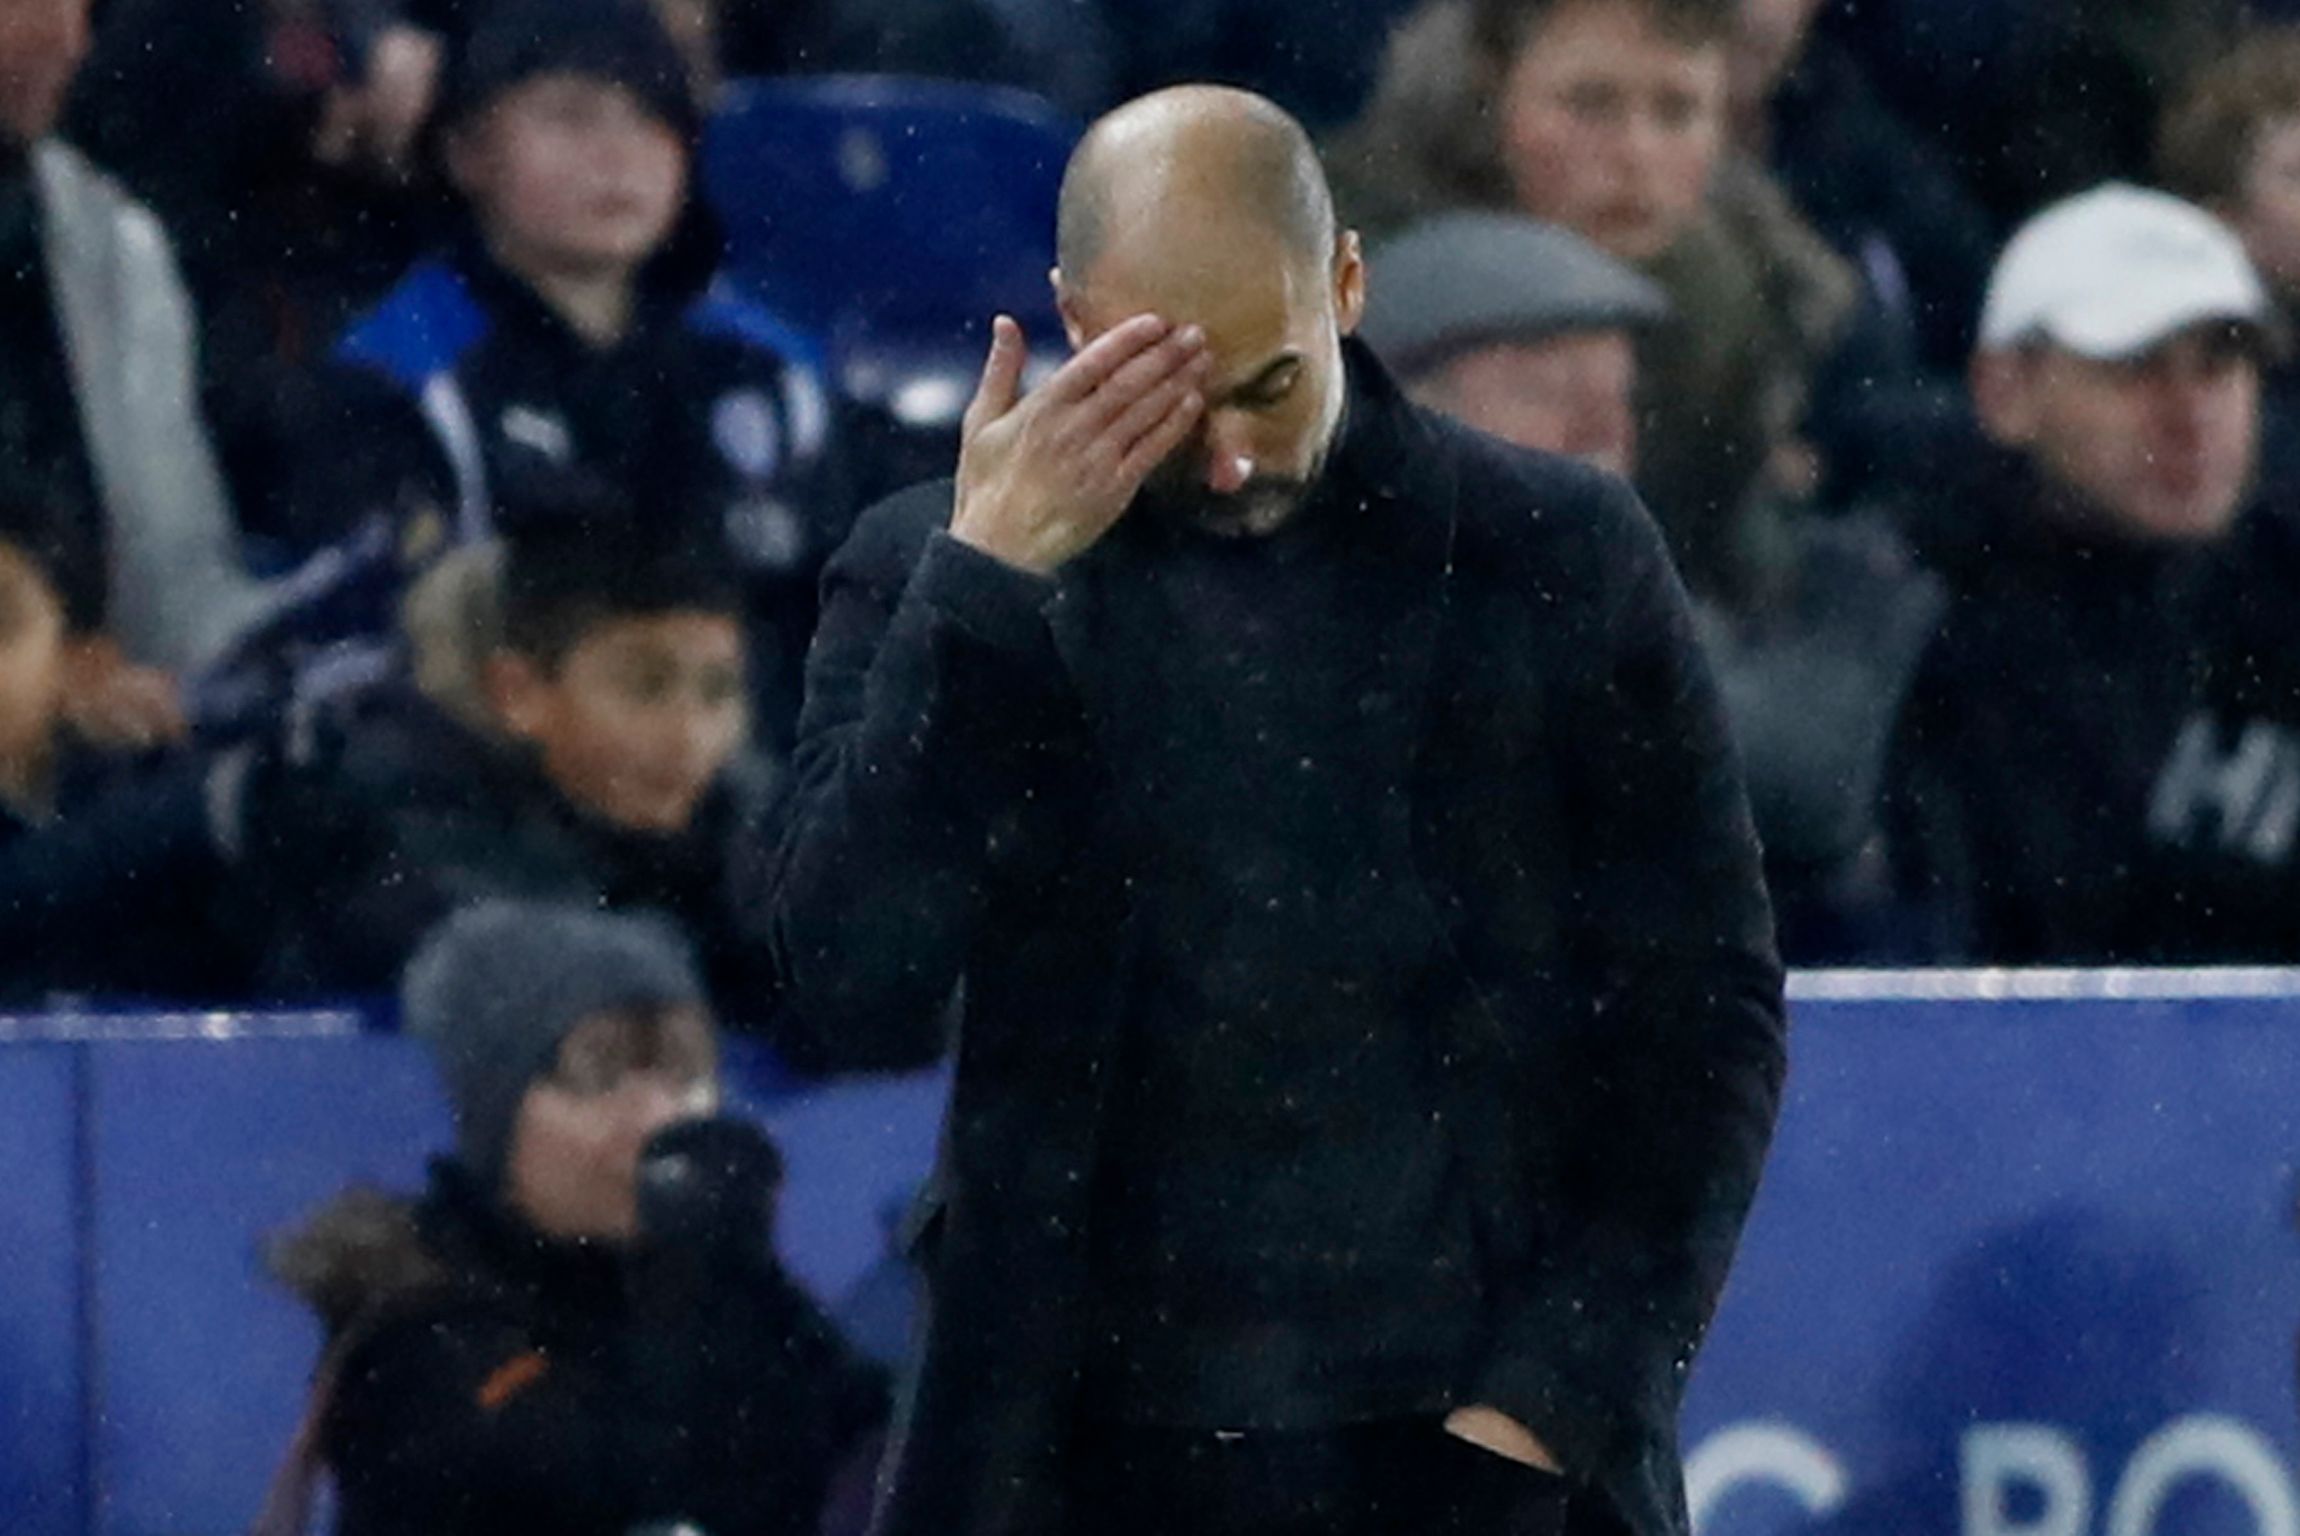 Football Soccer Britain - Leicester City v Manchester City - Premier League - King Power Stadium - 10/12/16 Manchester City manager Pep Guardiola looks dejected  Action Images via Reuters / Carl Recine Livepic EDITORIAL USE ONLY. No use with unauthorized audio, video, data, fixture lists, club/league logos or "live" services. Online in-match use limited to 45 images, no video emulation. No use in betting, games or single club/league/player publications. Please contact your account representative